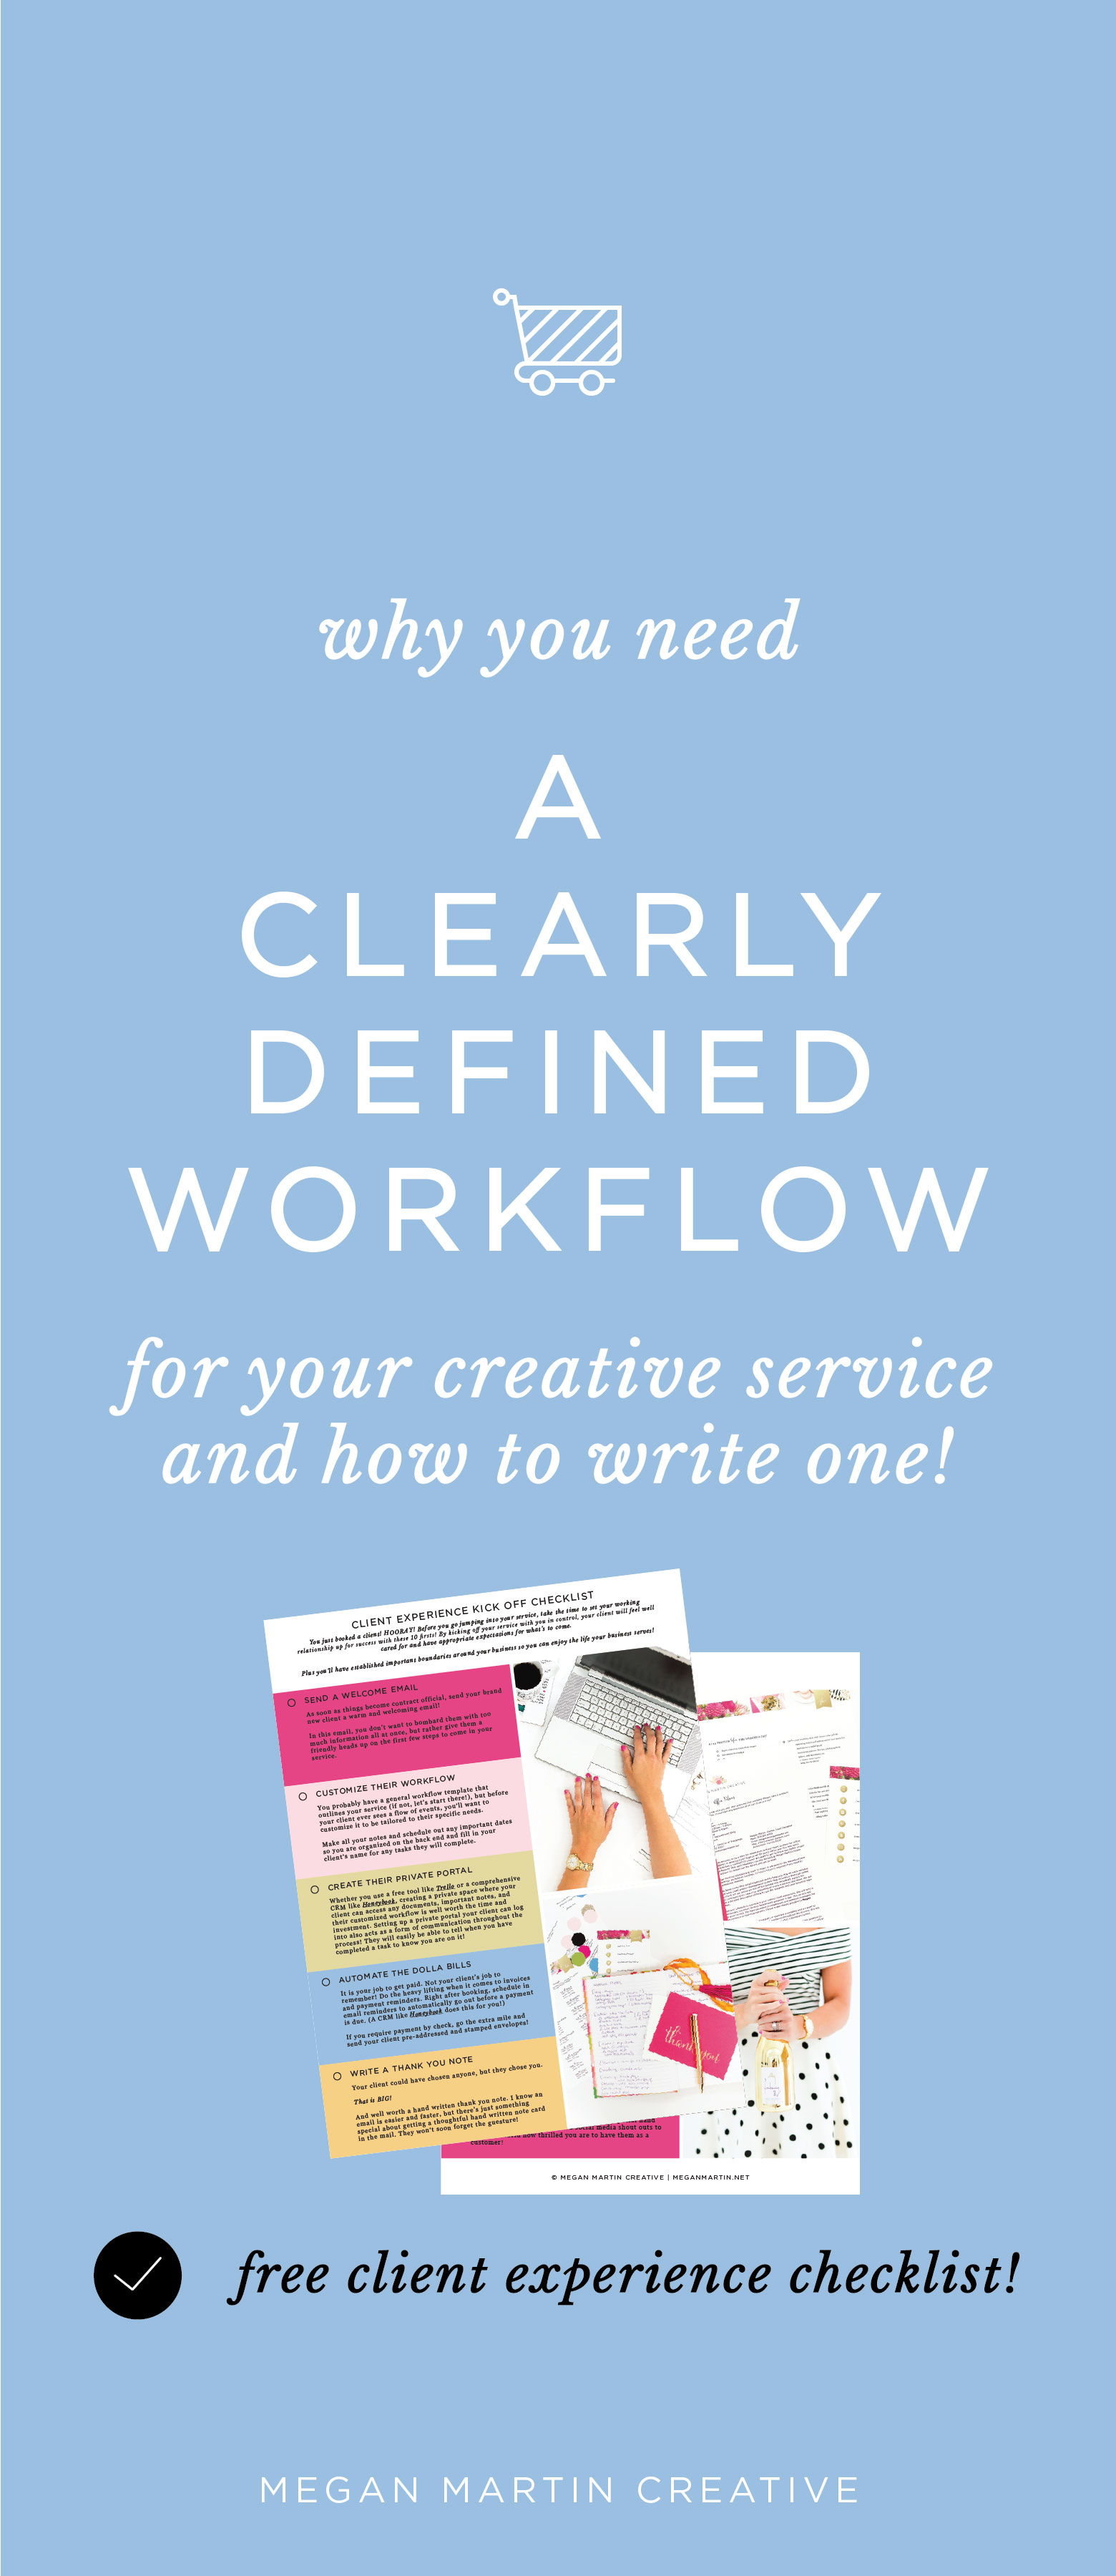 Why a clearly defined client workflow is paramount in your creative service based business and how to write one on Megan Martin Creative, client experience checklist, how to book more clients, how to get more business, creative entrepreneur, Welcome Packet, business tips